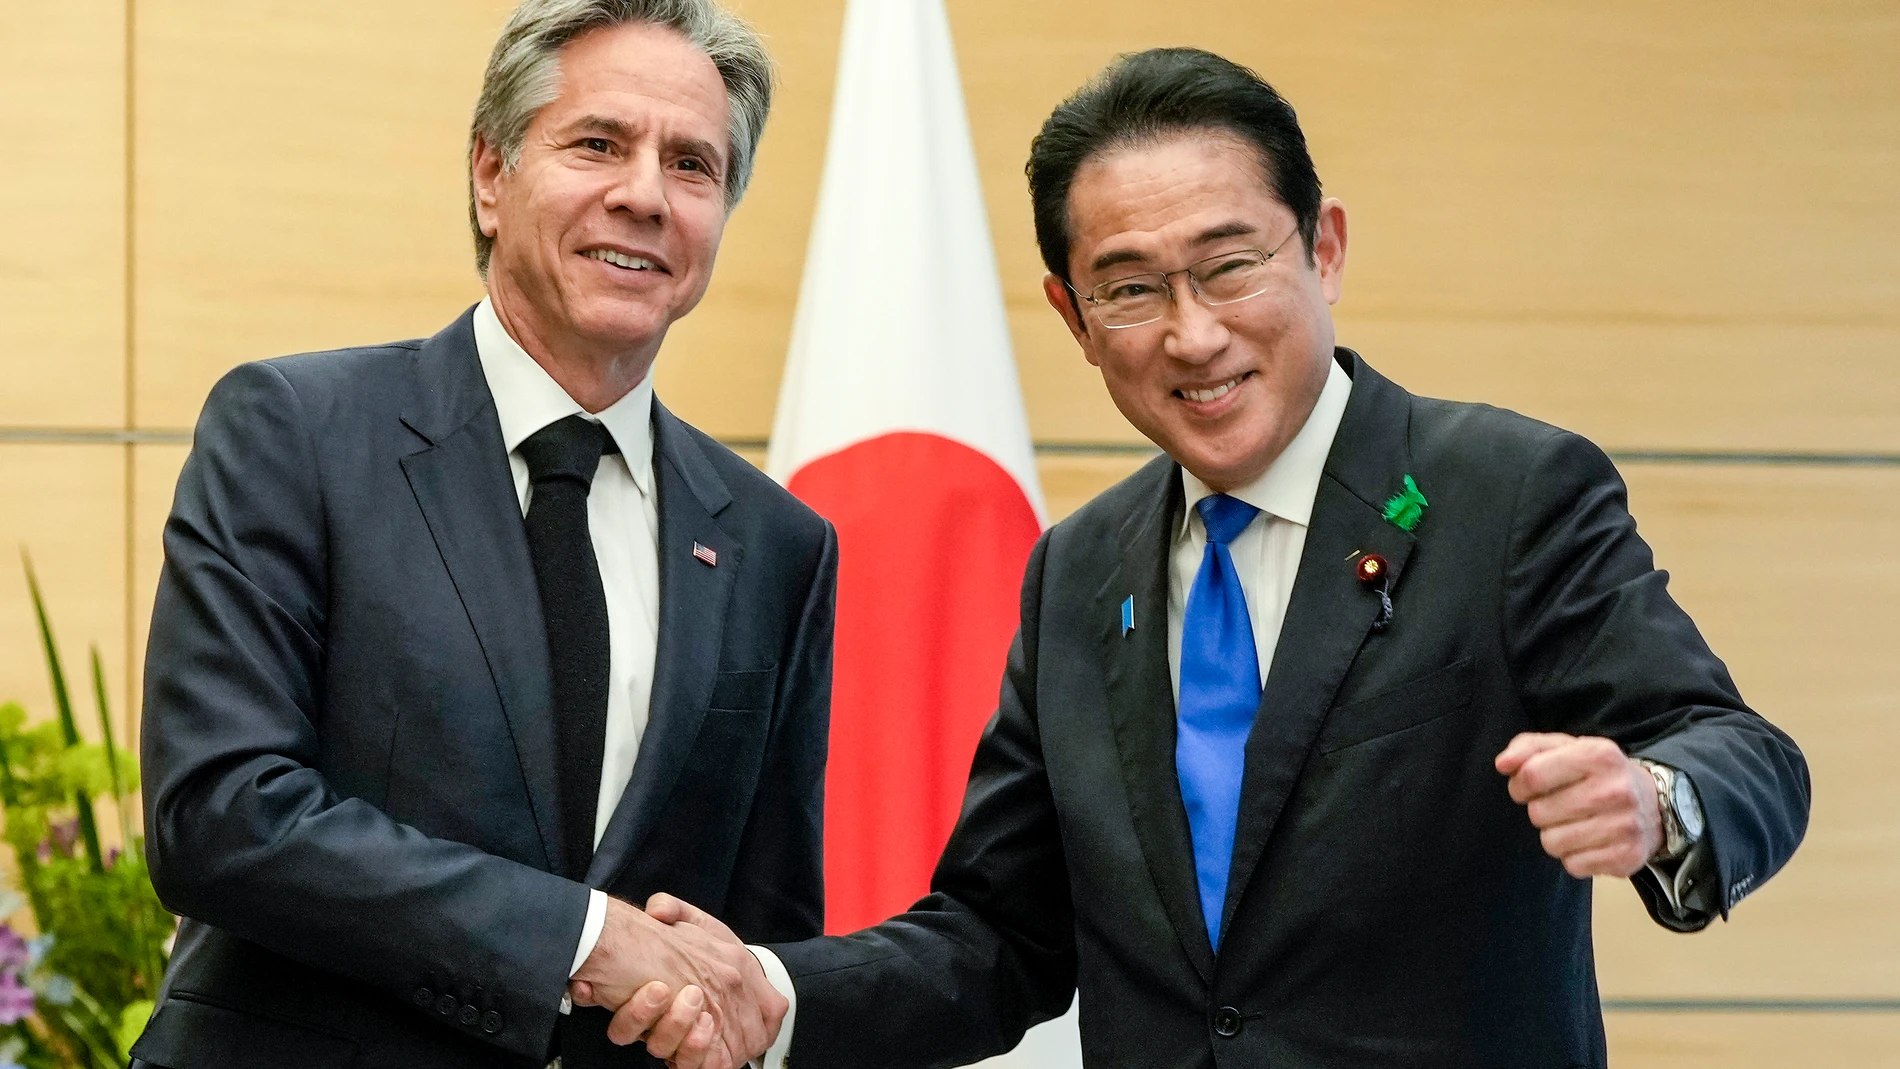 U.S. Secretary of State Antony Blinken, left, meets Japanese Prime Minister Fumio Kishida at the latter's official residence in Tokyo, Japan, Tuesday, April 18, 2023 after Blinken attended the G7 Foreign Ministerial Meeting in Karuizawa, north of Tokyo. (Kimimasa Mayama/Pool Photo via AP)